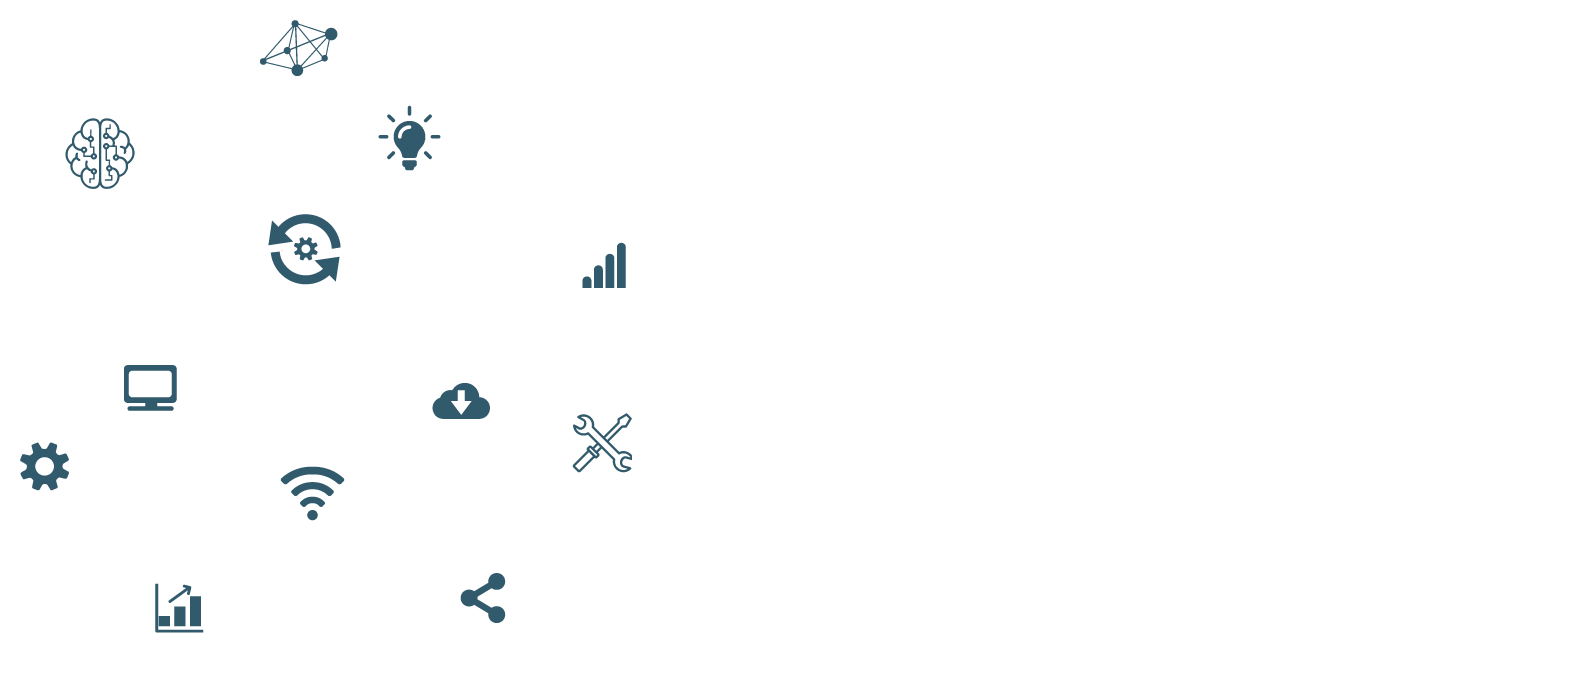 Future Enterprise Systems Africa Network PNG